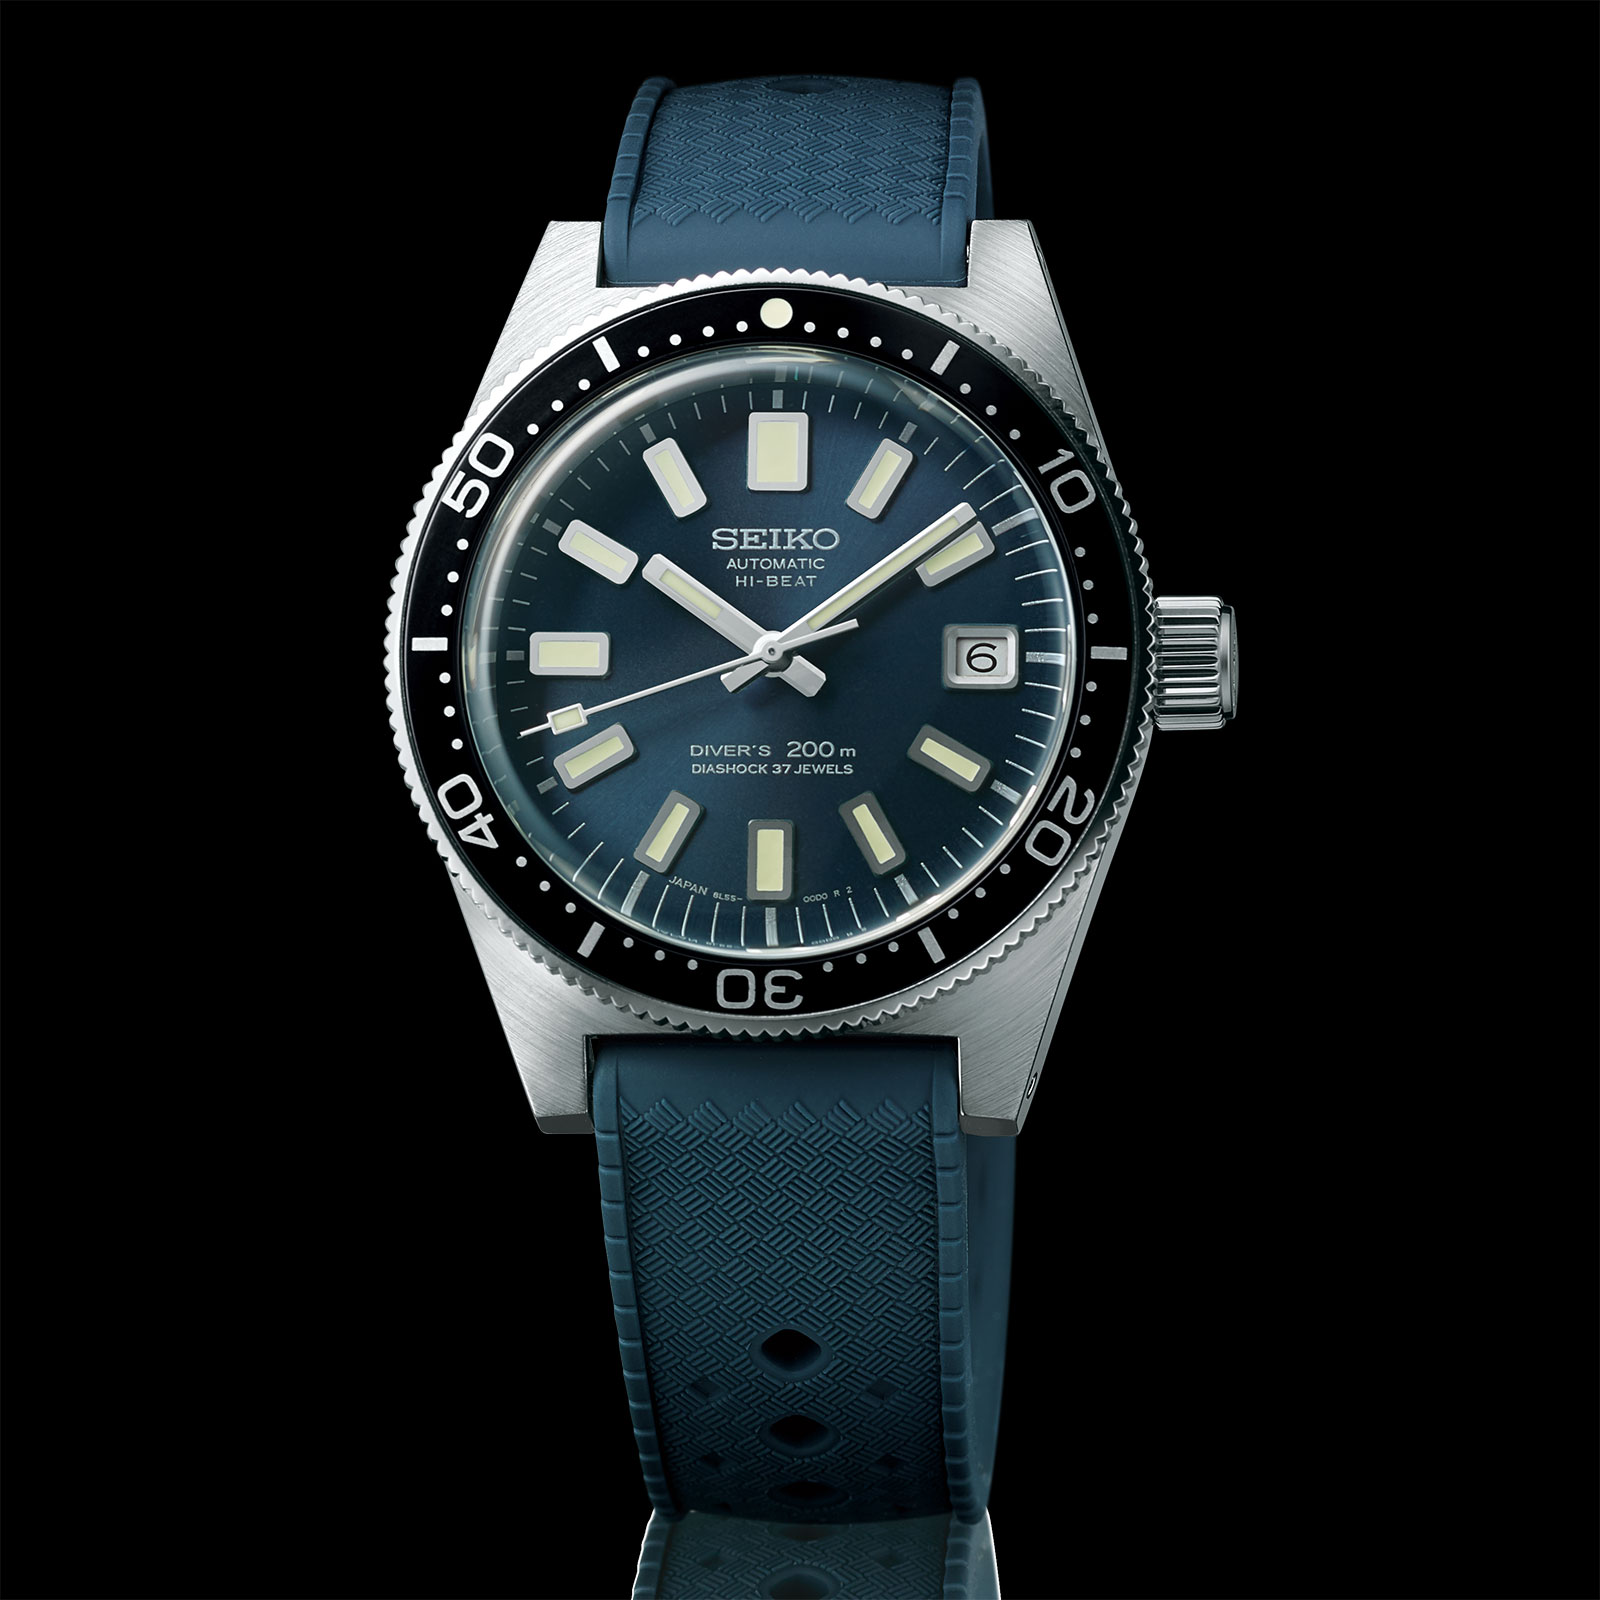 Seiko Introduces the Diver's Watch 55th Anniversary Trilogy | SJX Watches